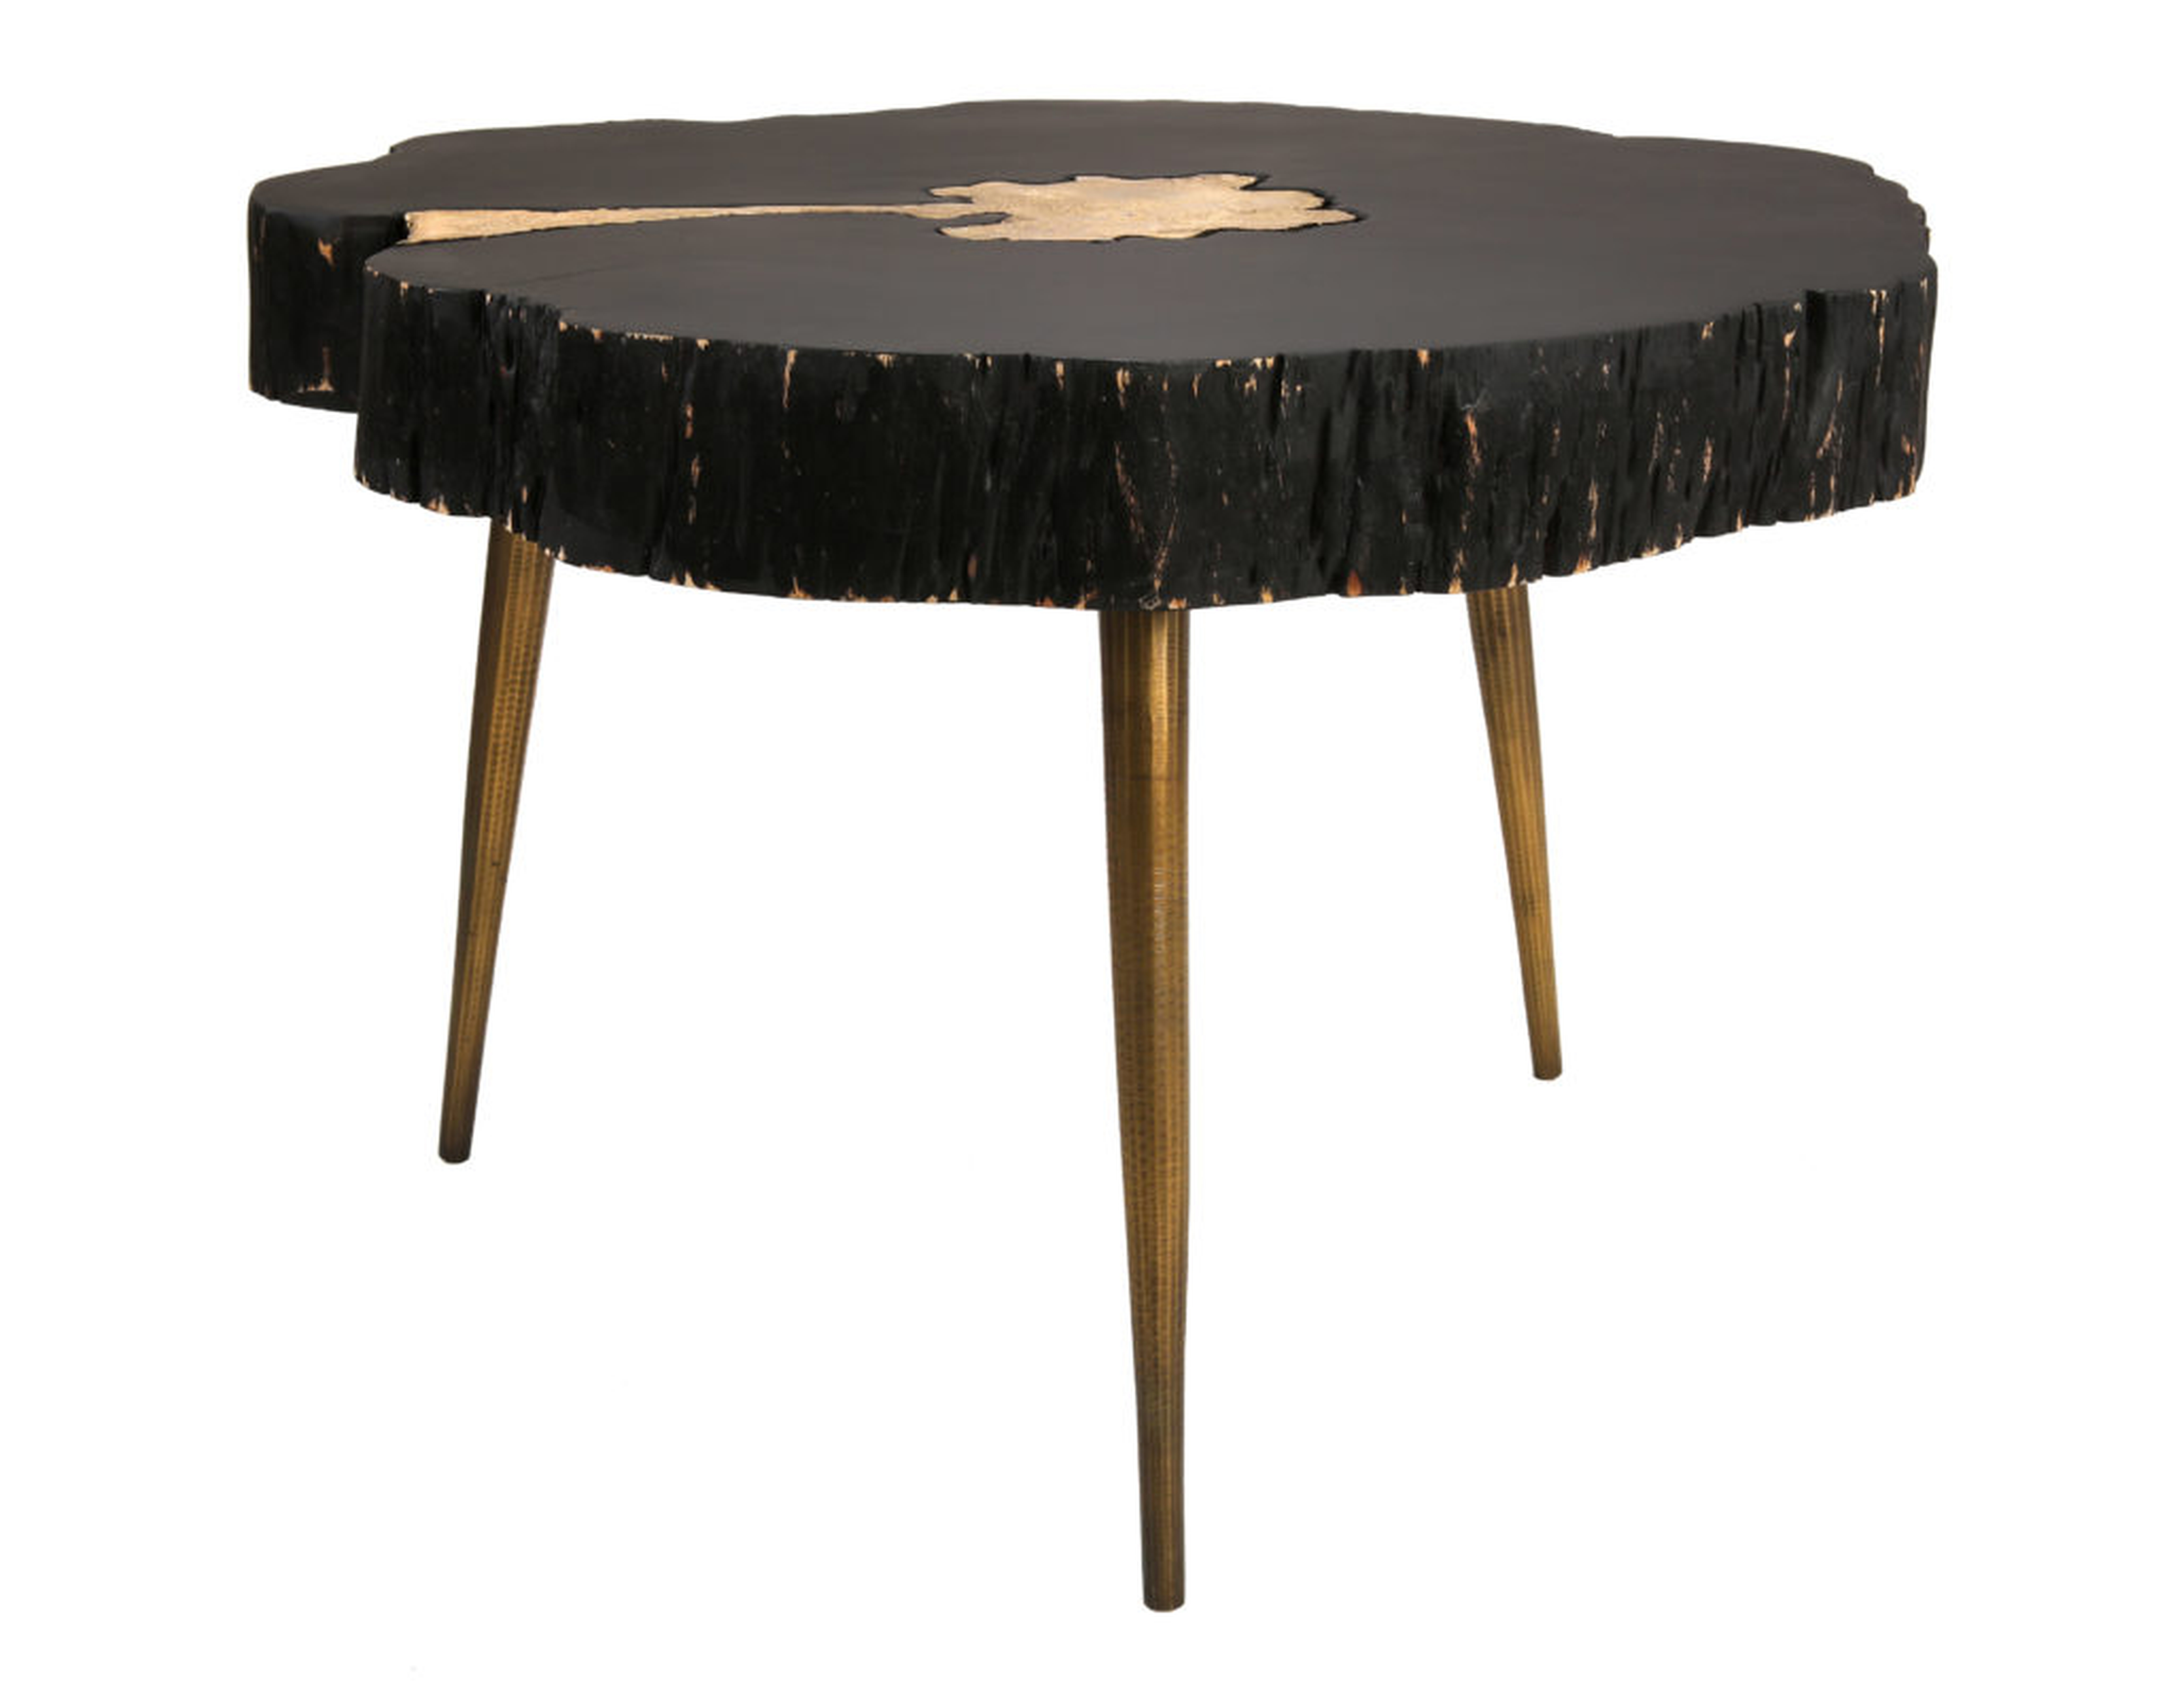 Kenzie Jane and Brass Coffee Table - Maren Home